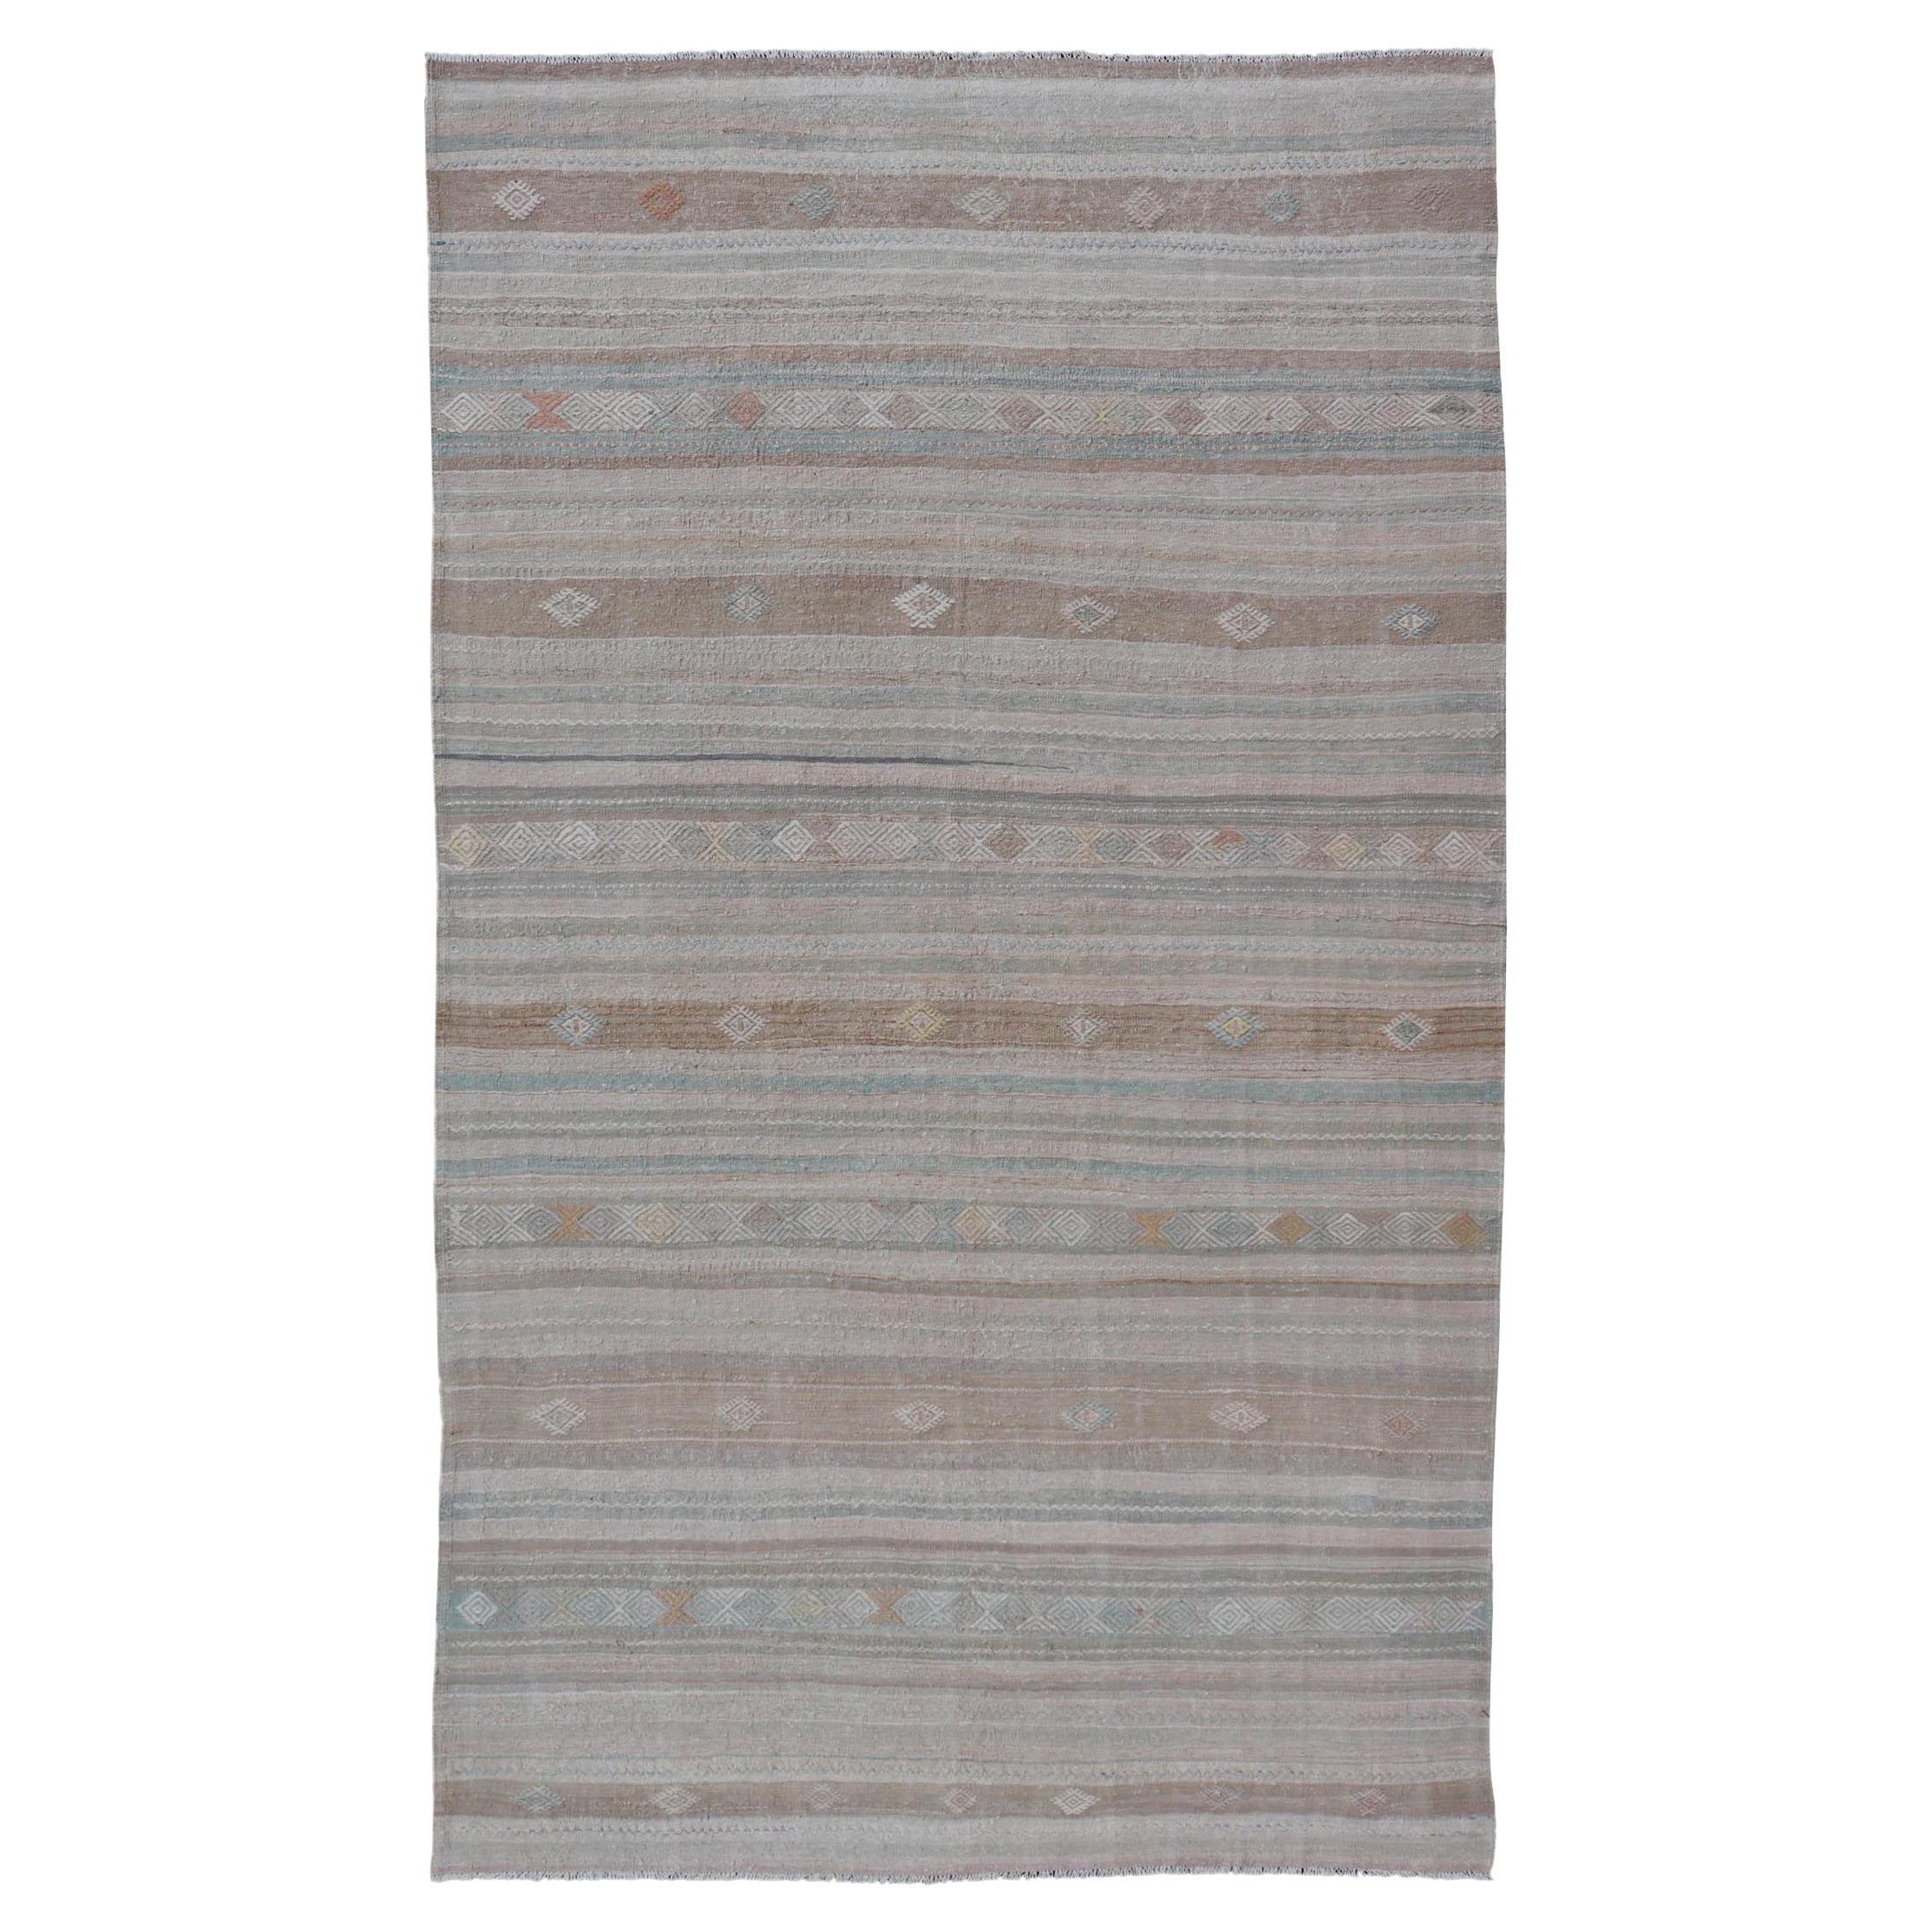 Turkish Flat-Weave Kilim with Embroideries in Taupe, Tan, Light Green, and Grey For Sale